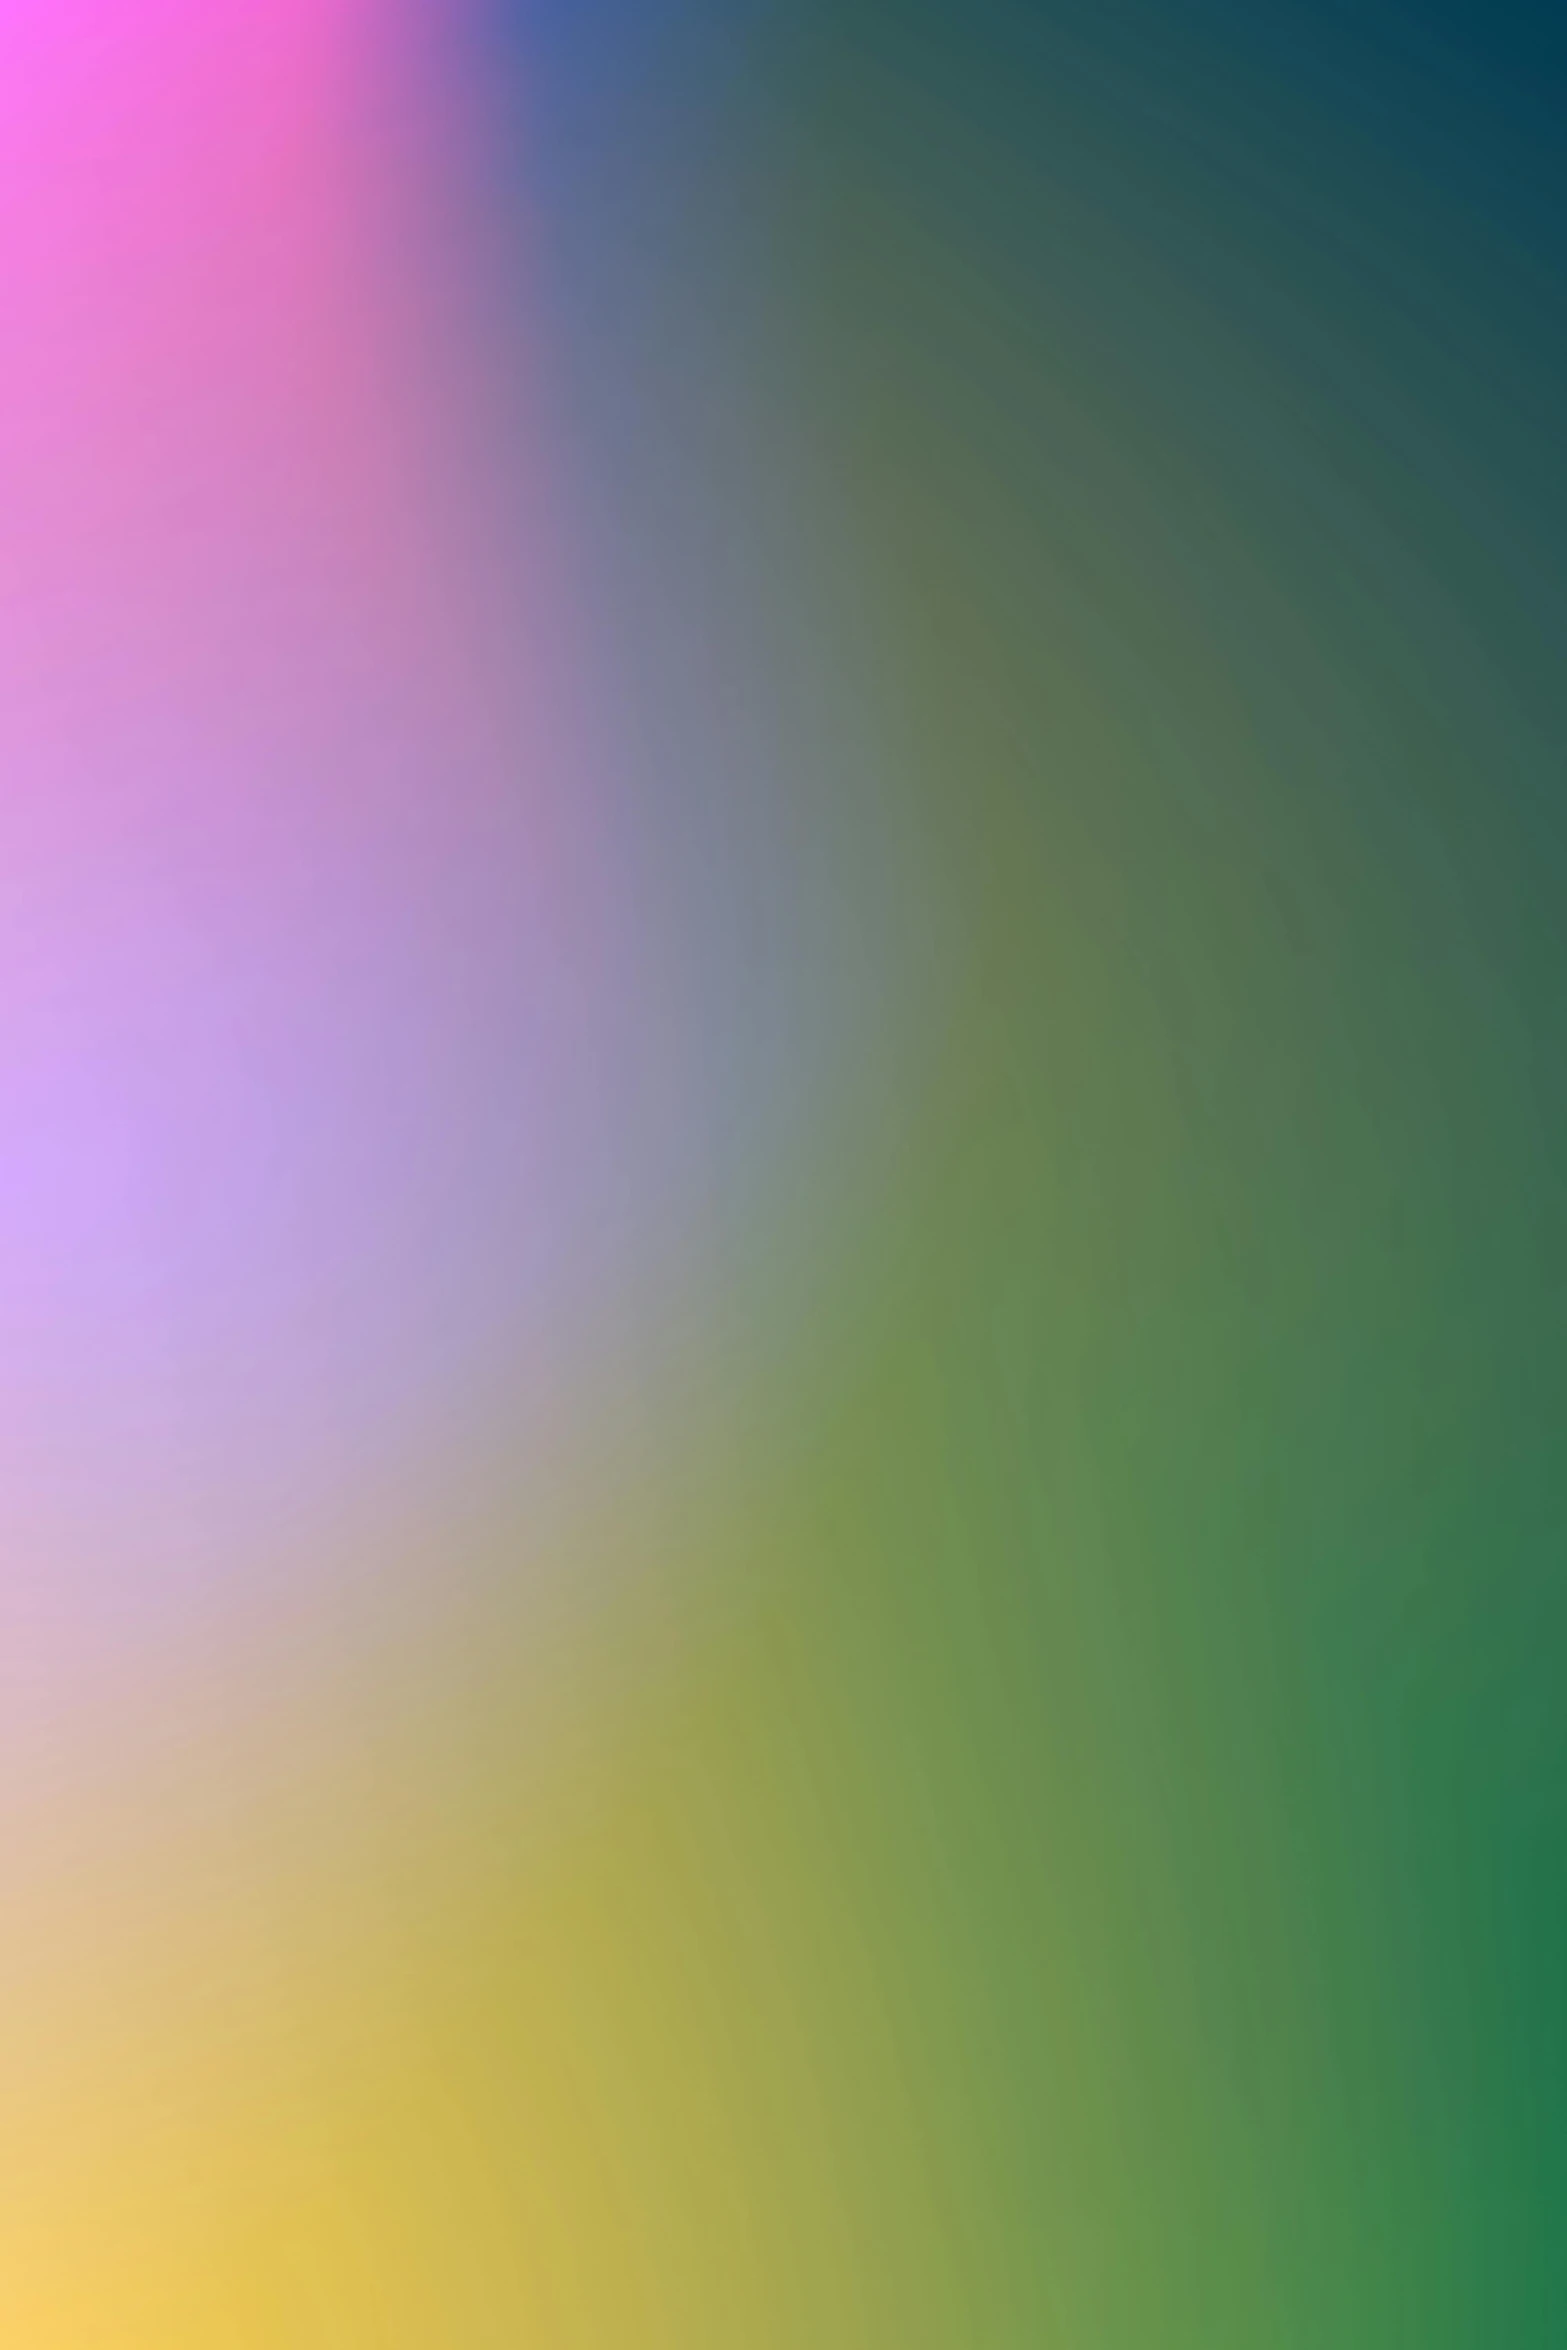 a blurry image of a rainbow colored background, a picture, unsplash, color field, iridescent # imaginativerealism, colorful dark vector, green magenta and gold, soft light - n 9